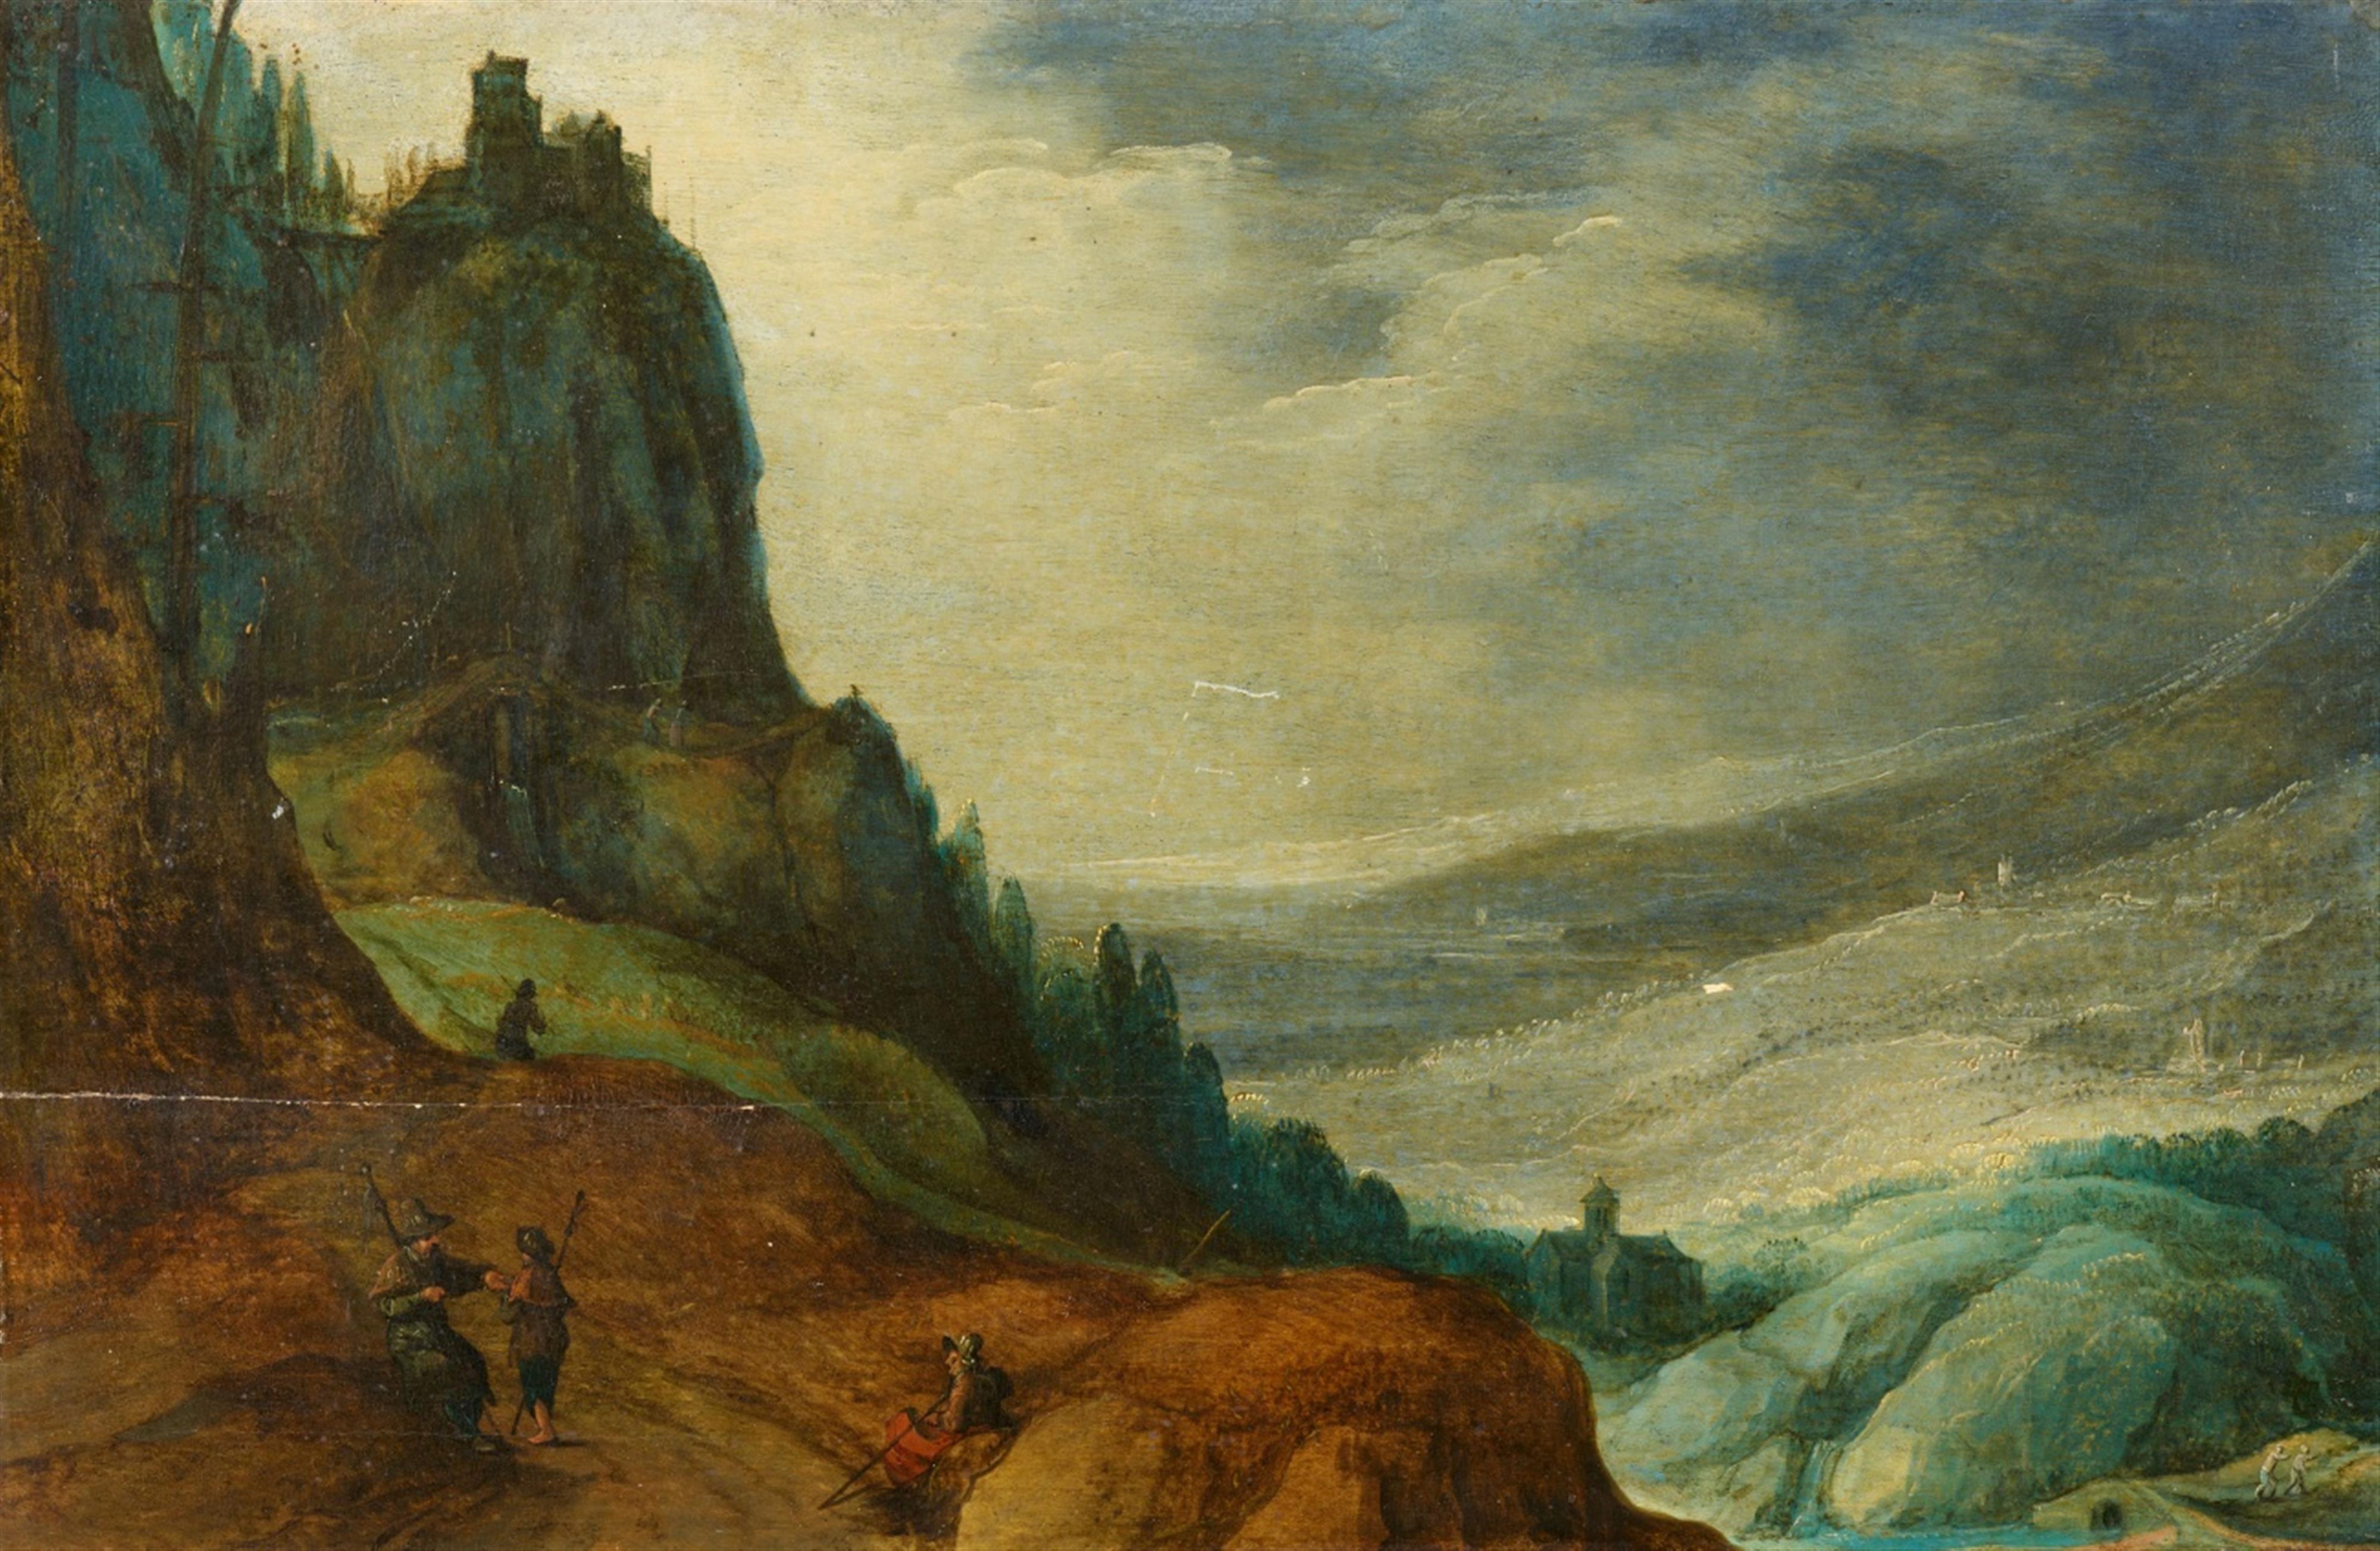 Joos de Momper - Mountain Landscape with a Church and Travellers - image-1